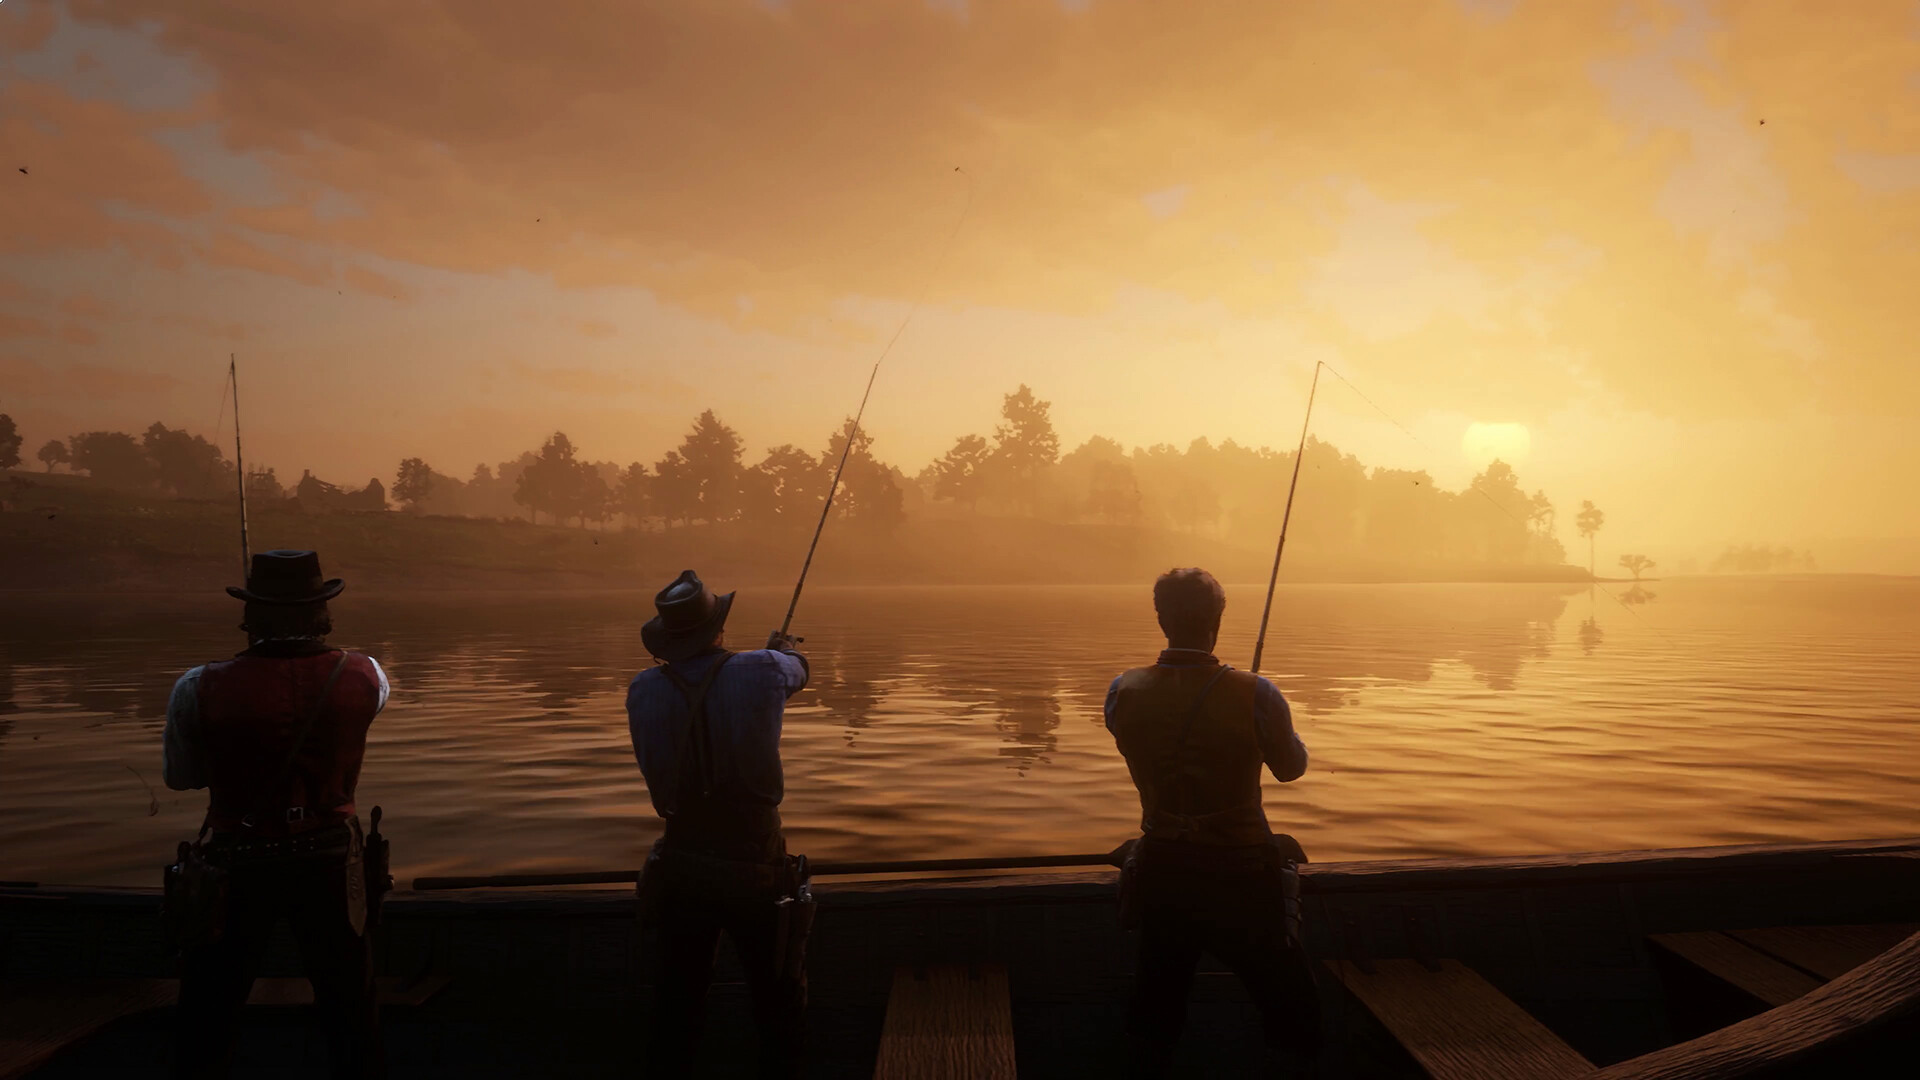 Fishing, Red Dead Redemption 2, Sports, Background image, 1920x1080 Full HD Desktop